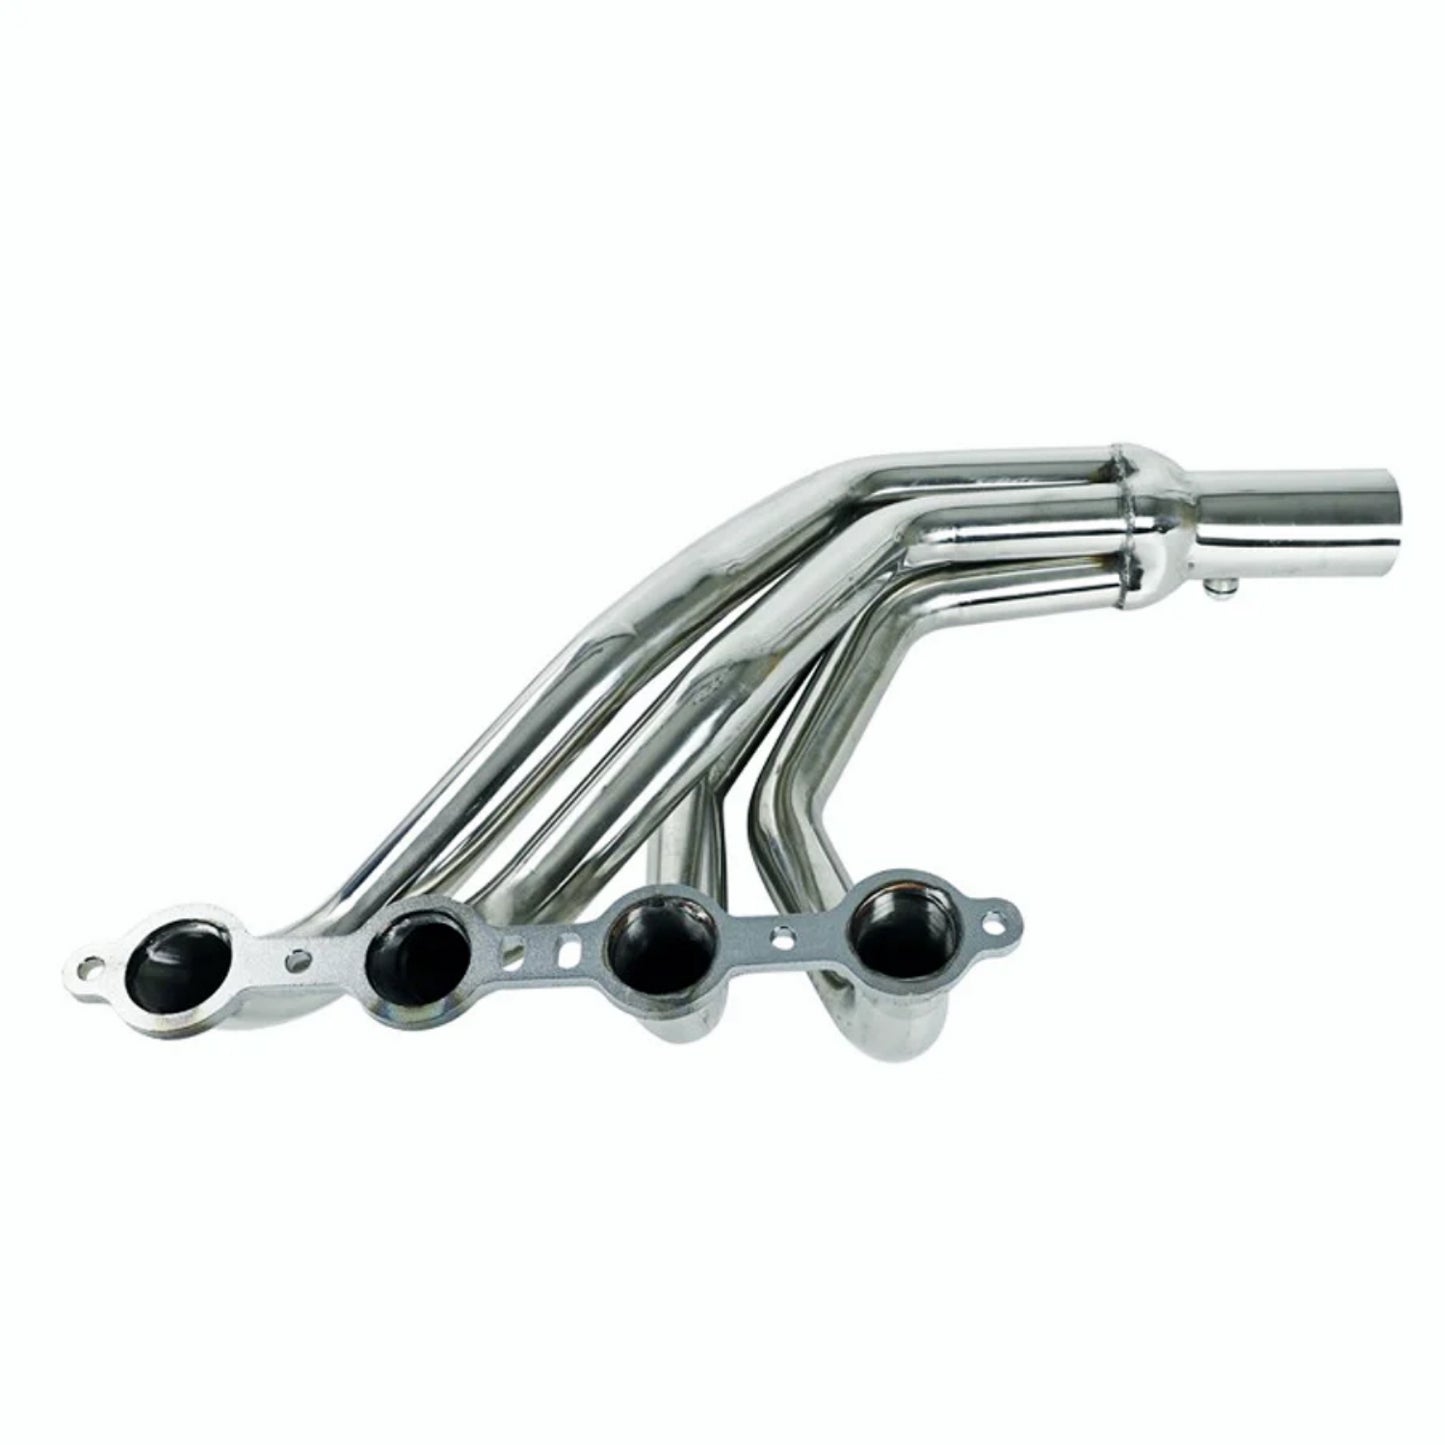 Exhaust Manifold Header For 1979-1993 & 1994-2004 Ford Mustang 4.8L 5.3L Fox Body LS Conversion Swap Headers